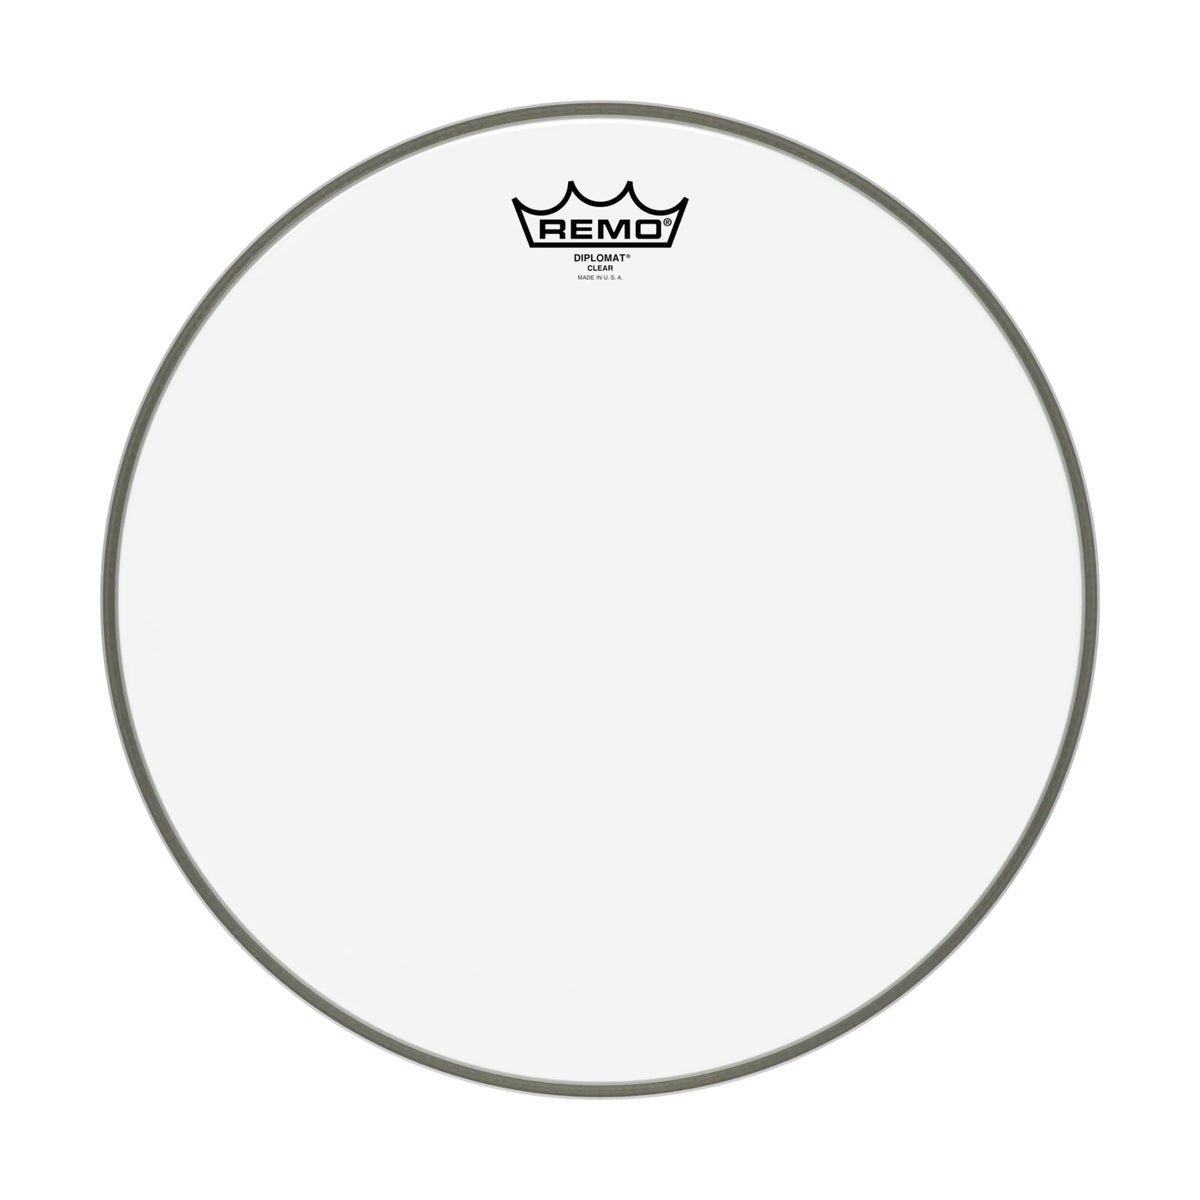 Remo Diplomat Clear 16 Inch Drum Head